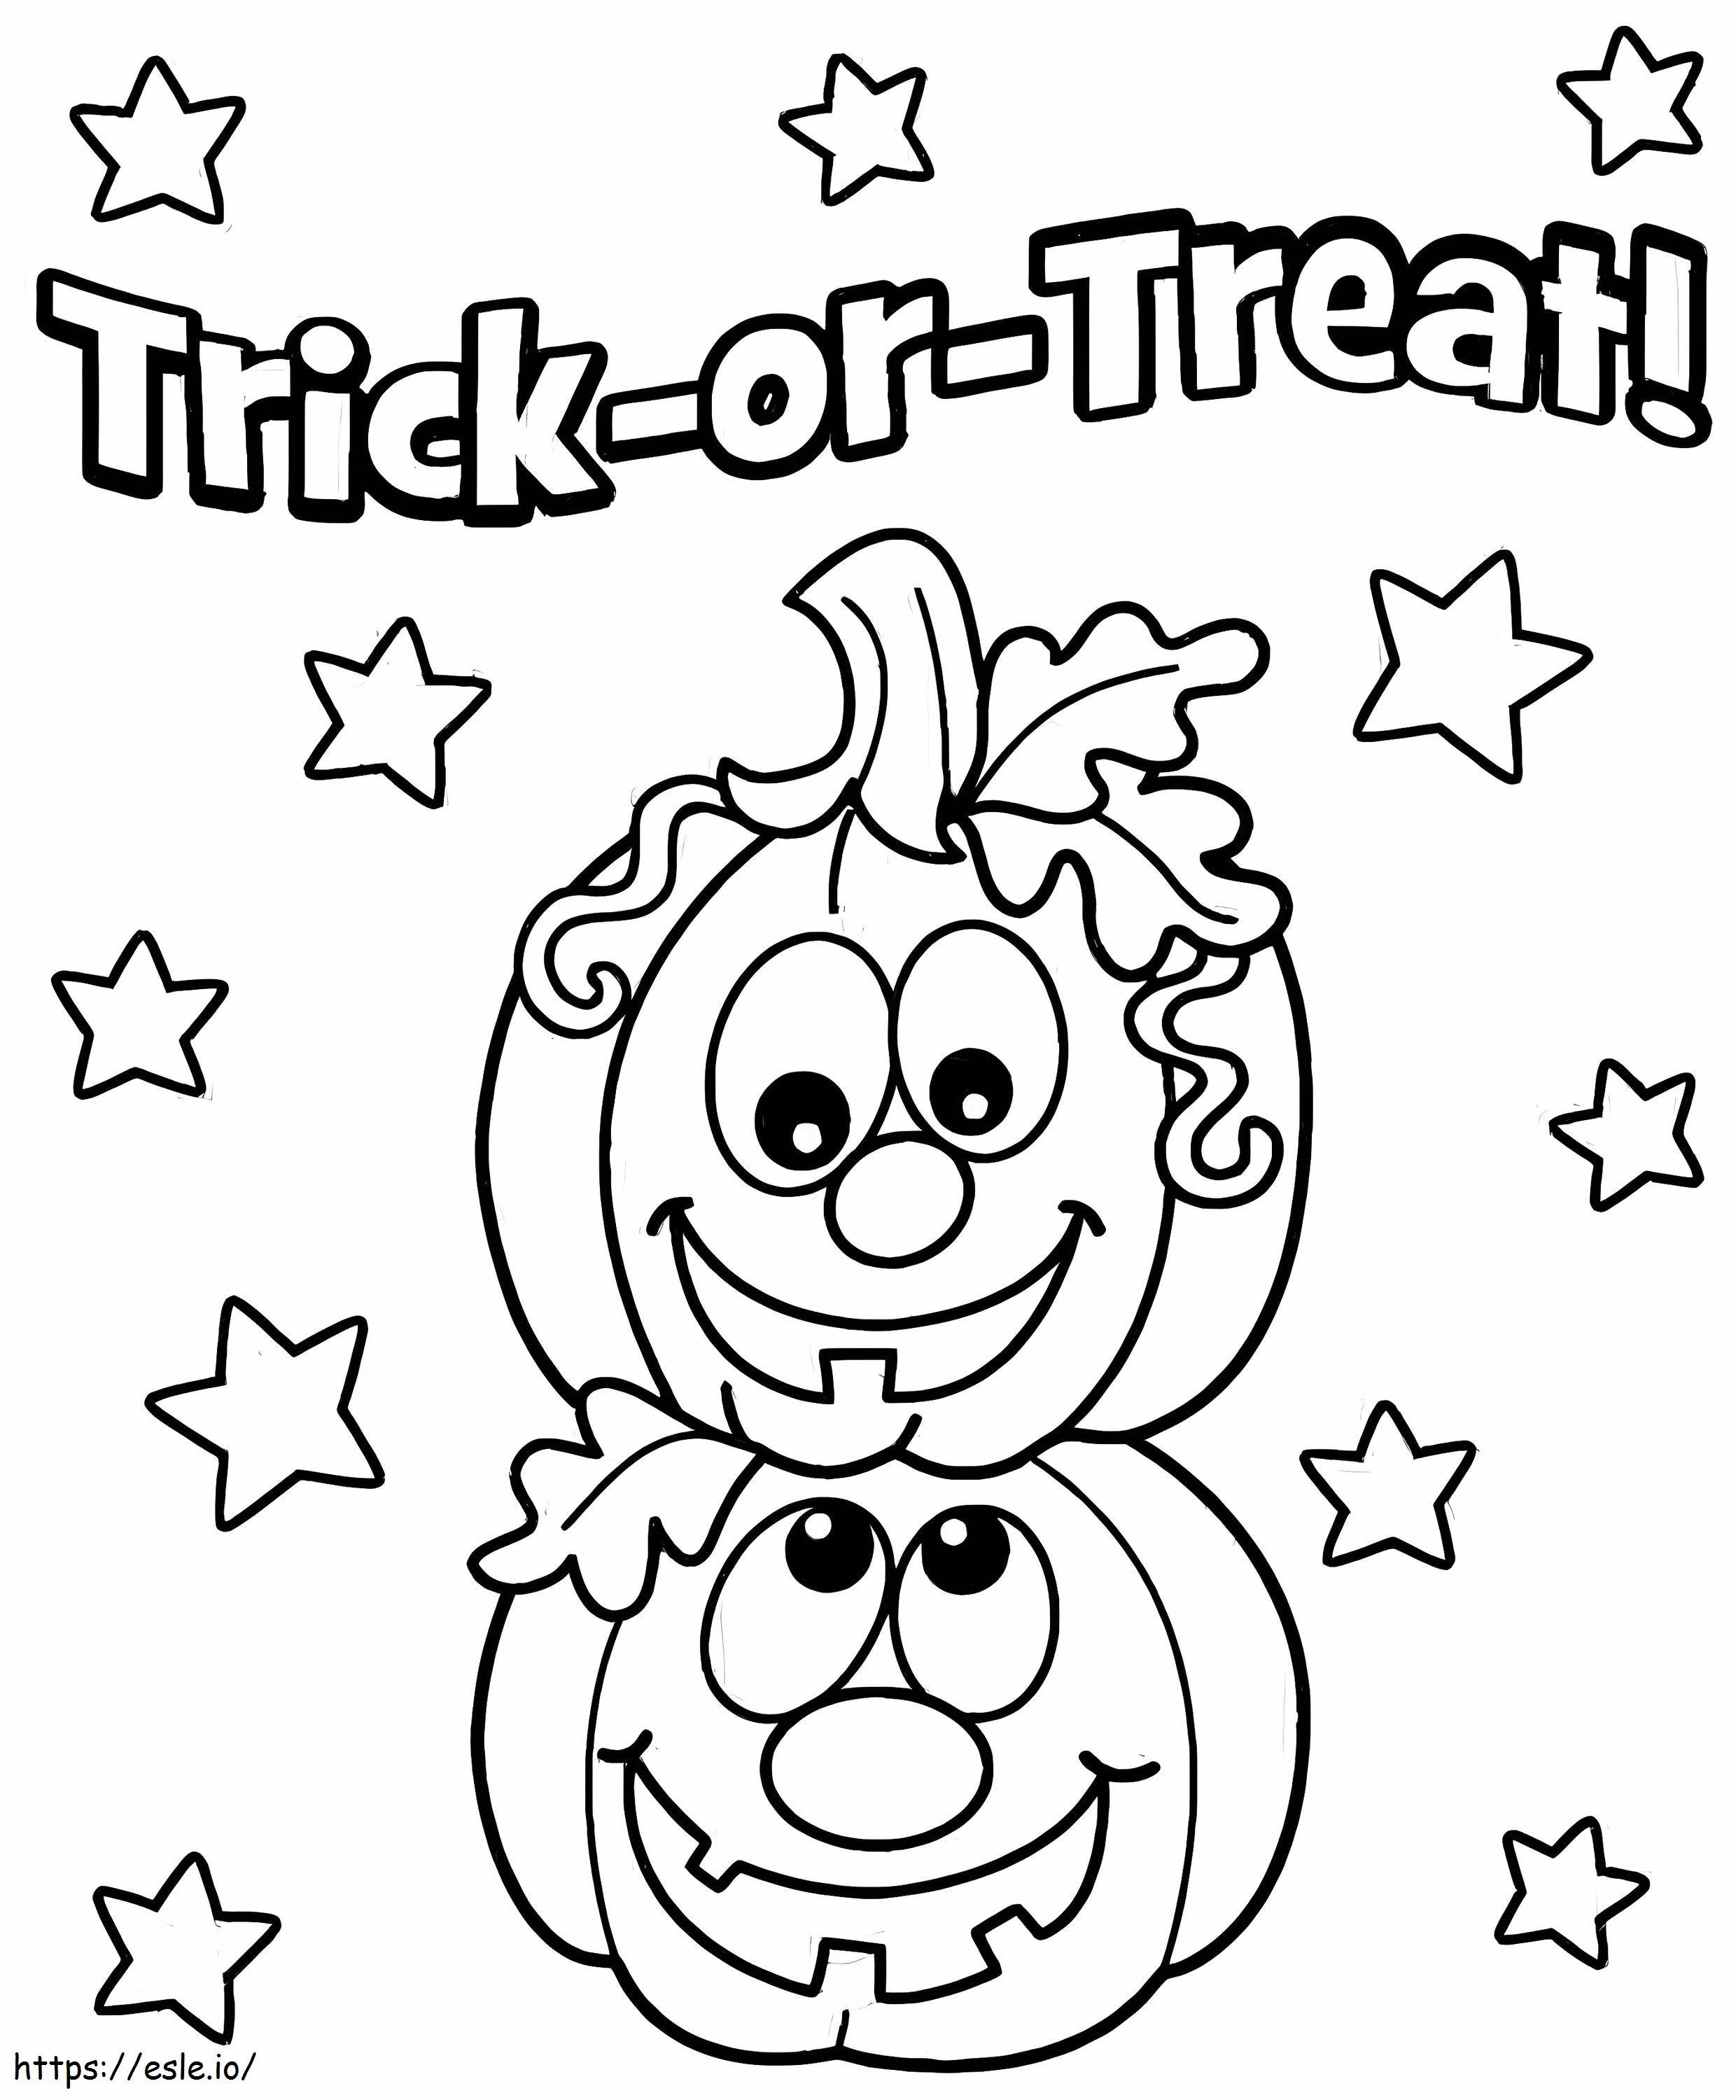 Trick Or Treat 6 coloring page